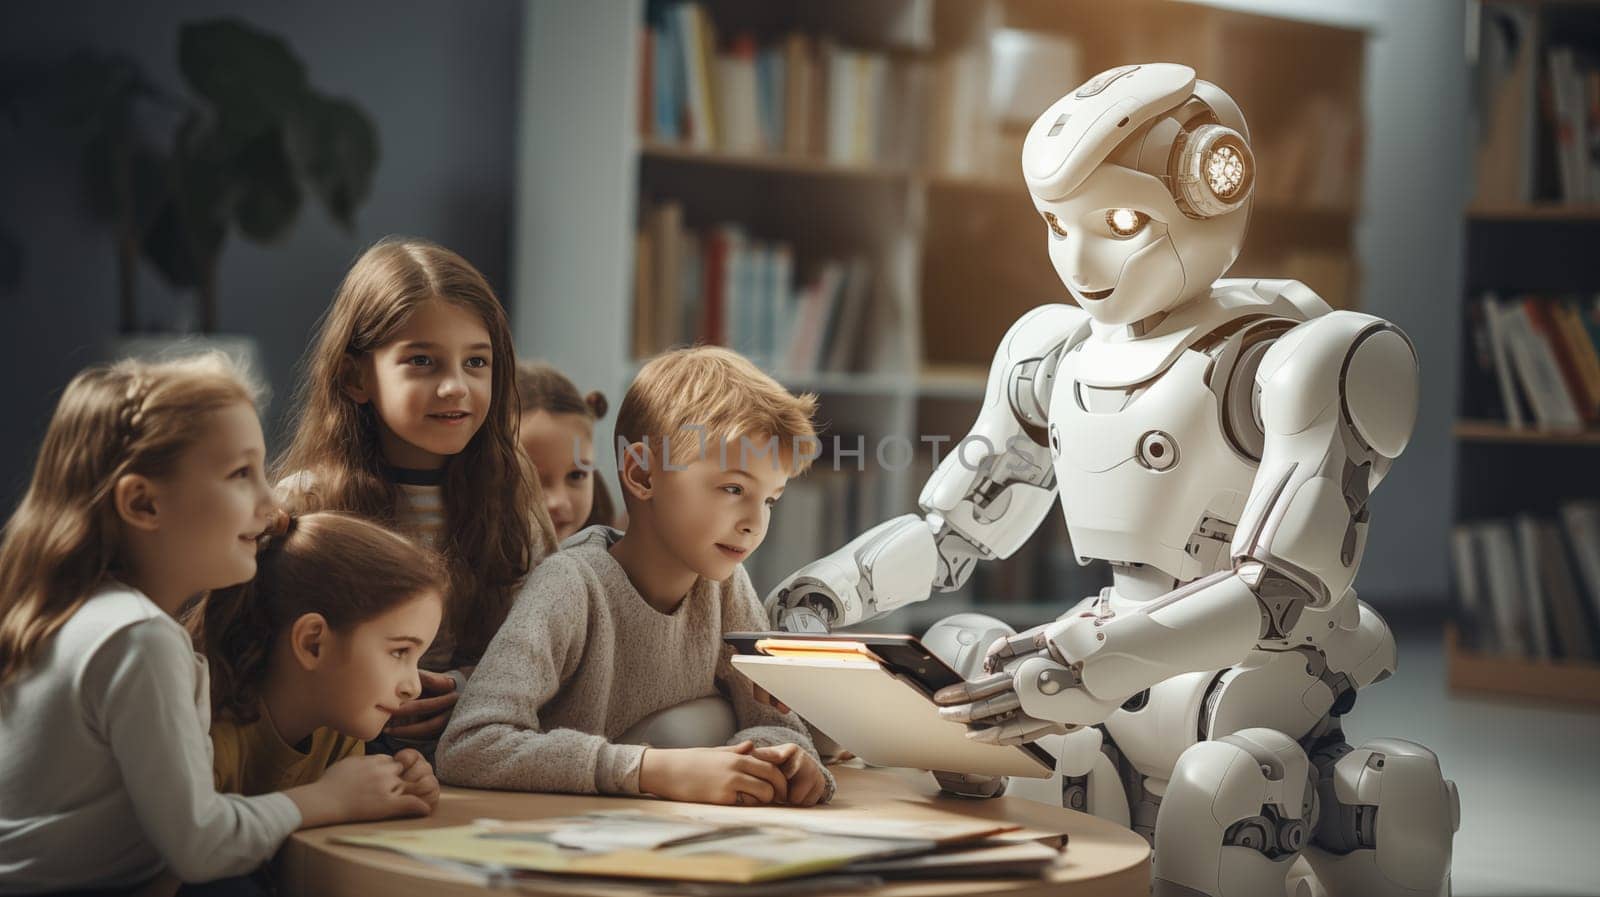 A humanoid robot interacts with a group of fascinated children, illustrating modern education and technology in a classroom setting.